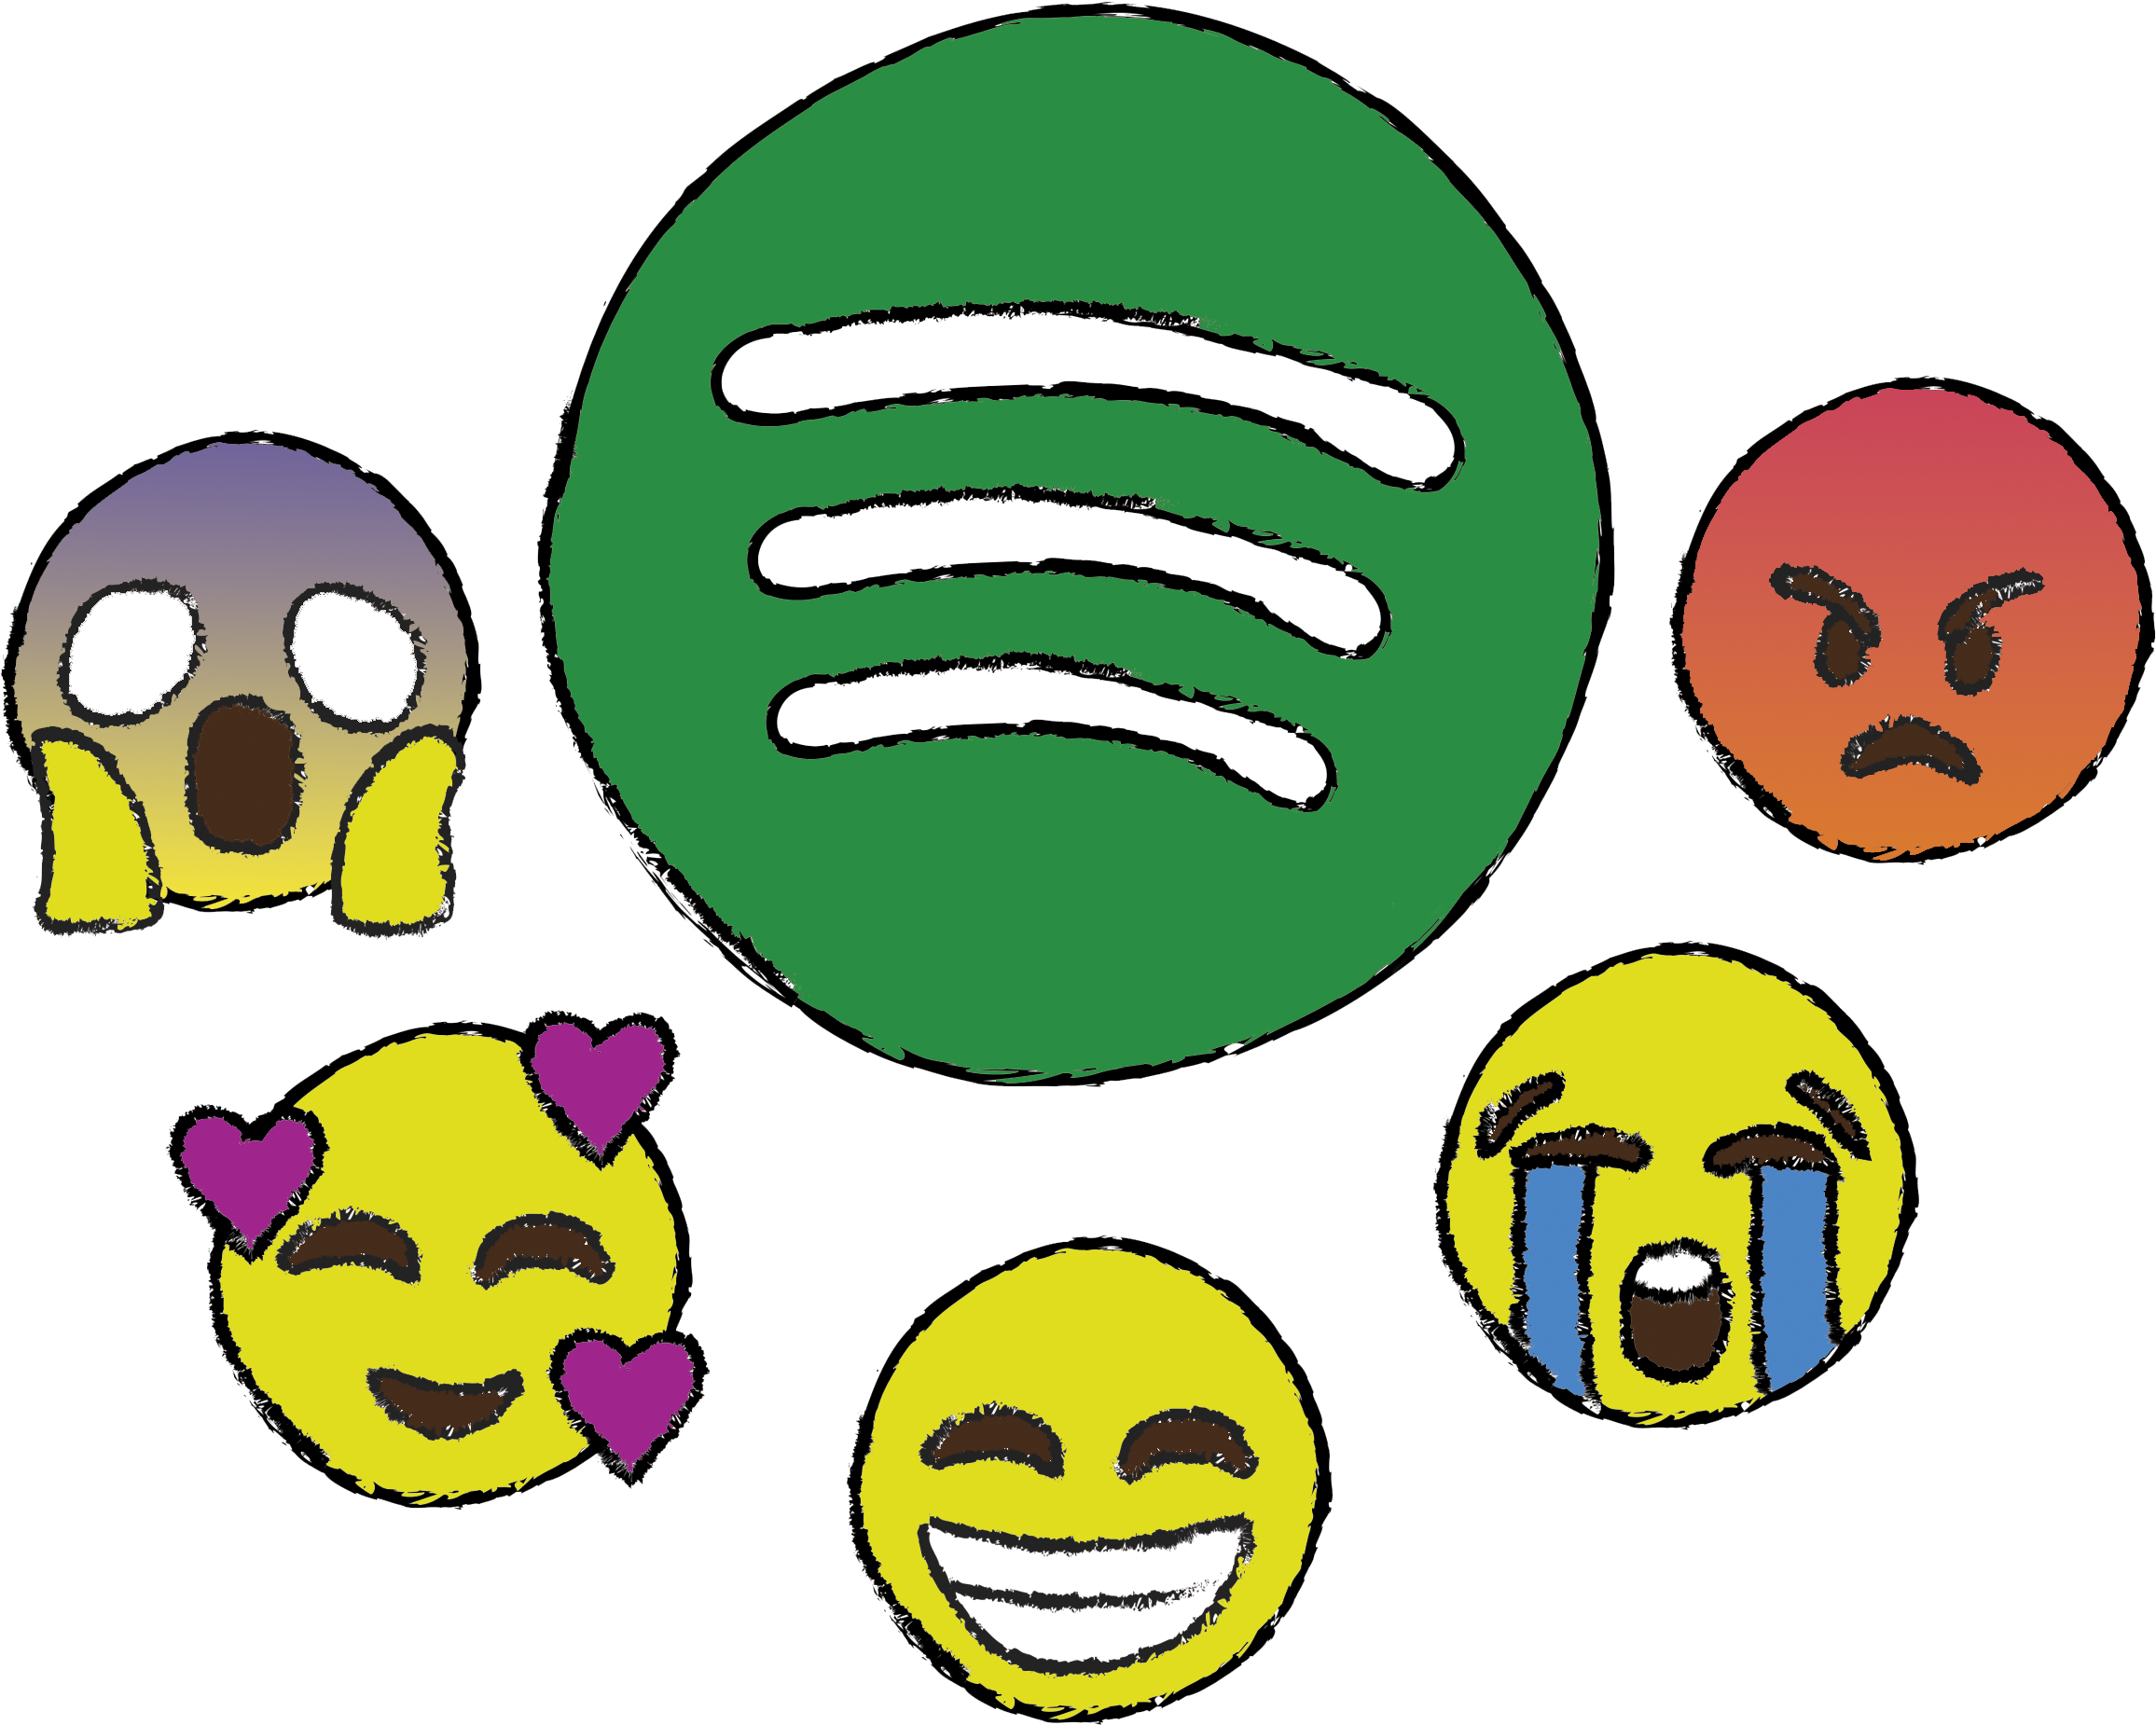 Spotify Tracks Moods, Activities With Big Data - Spotify Tracks Moods, Activities With Big Data (2486x2211)